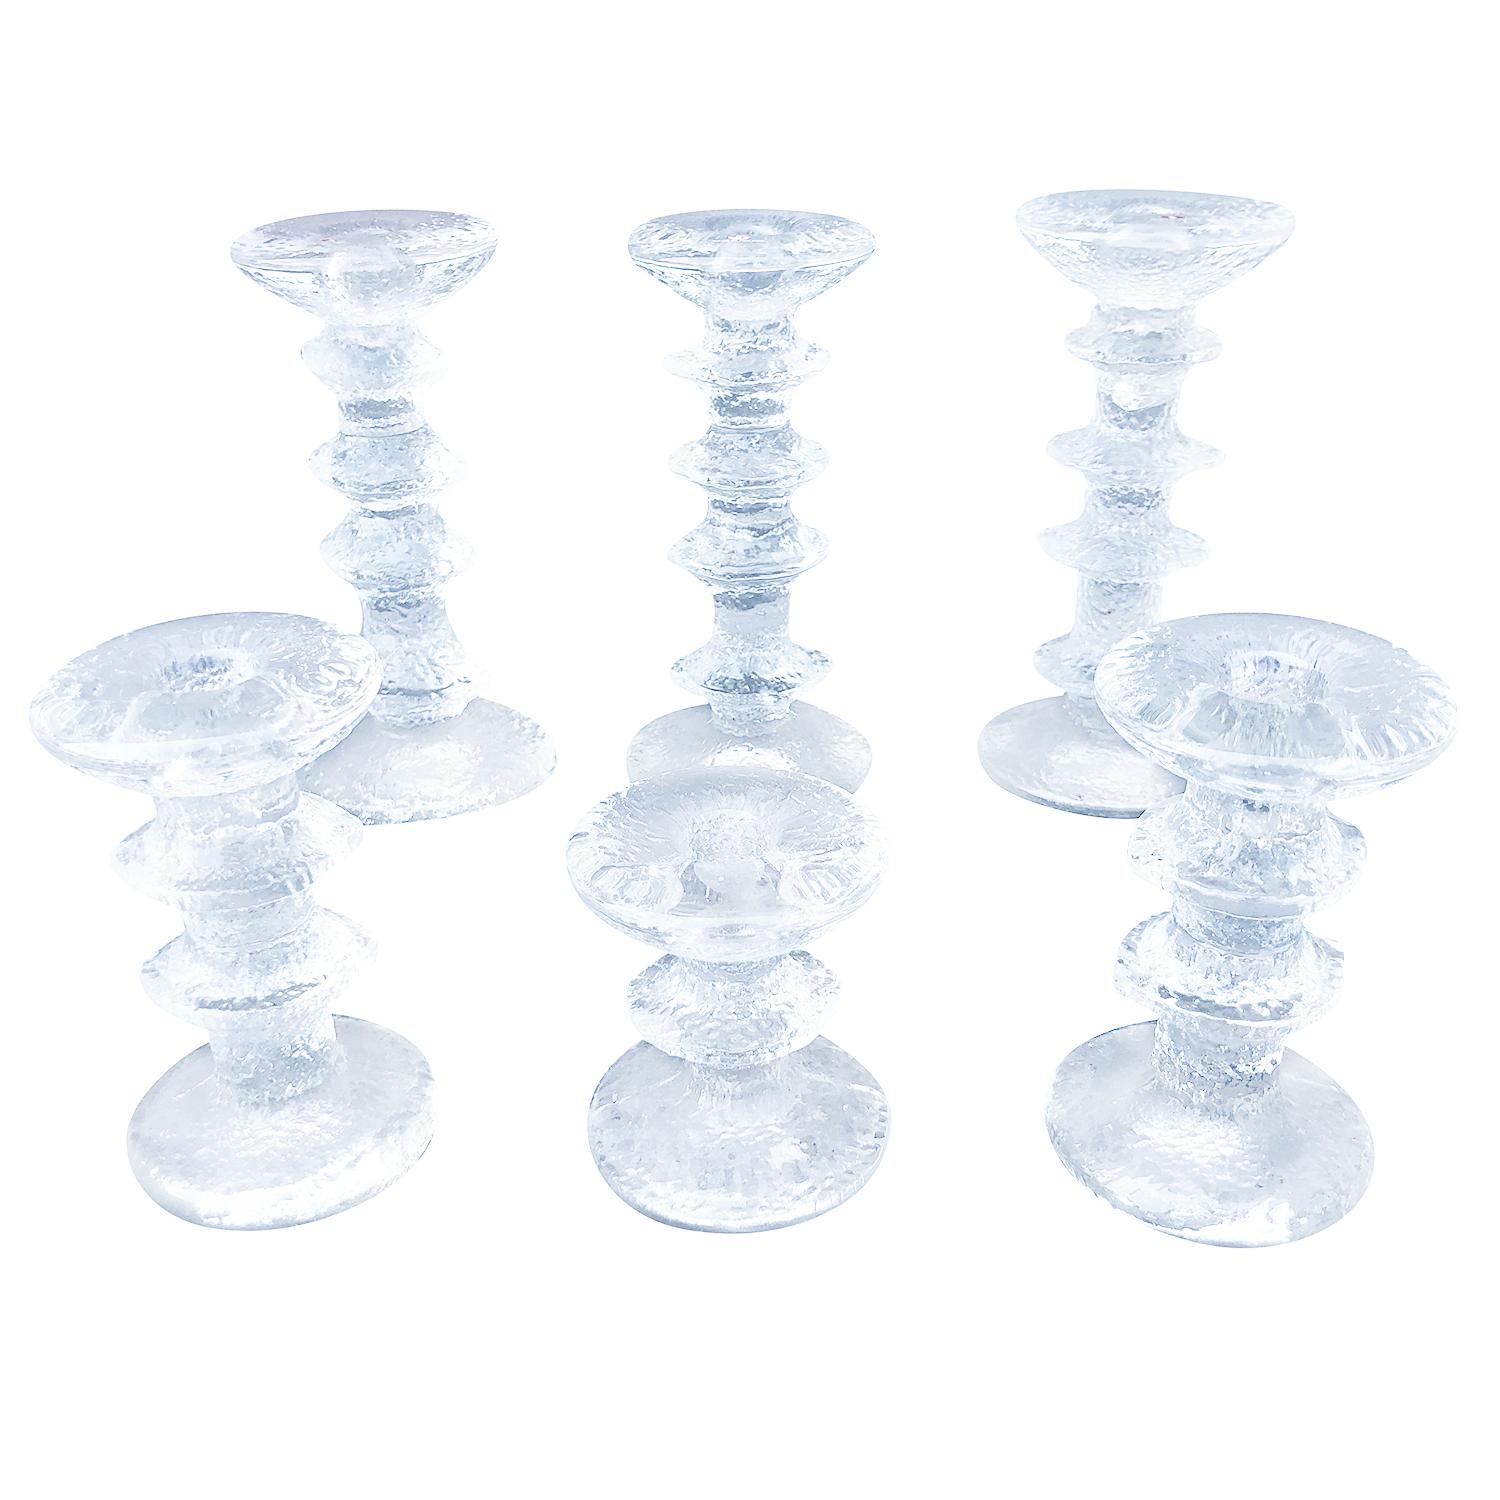 A vintage Mid-Century Modern Finnish set of candlesticks made of molded glass. Produced by Festivo - Iittala, designed by Timo Sarpaneva in good condition. The vintage candleholders come in a variety of sizes which creates an astonishing display